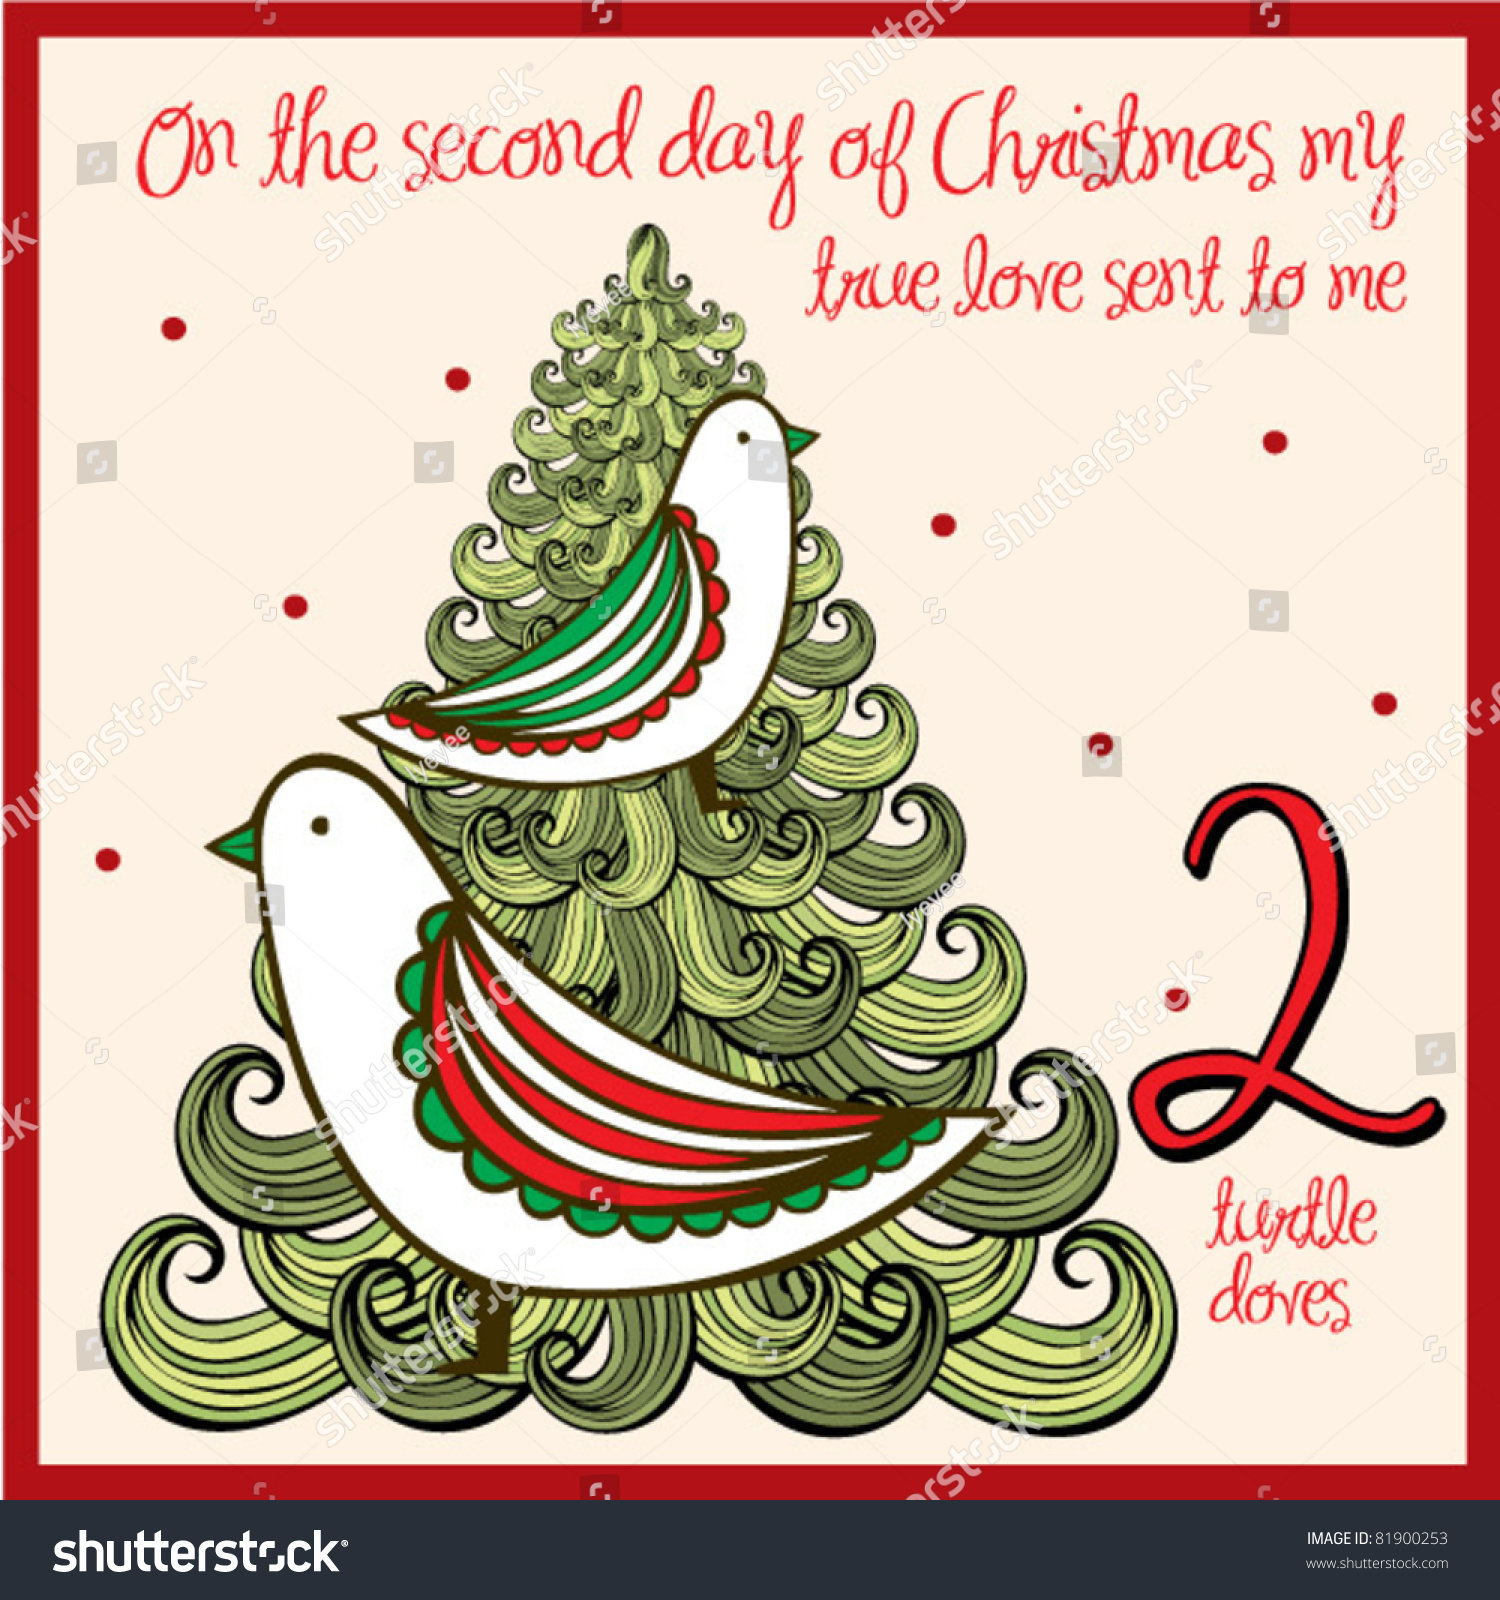 The 12 Days Of Christmas - Second Day - Two Turtle Doves Stock Vector Illustration 81900253 ...